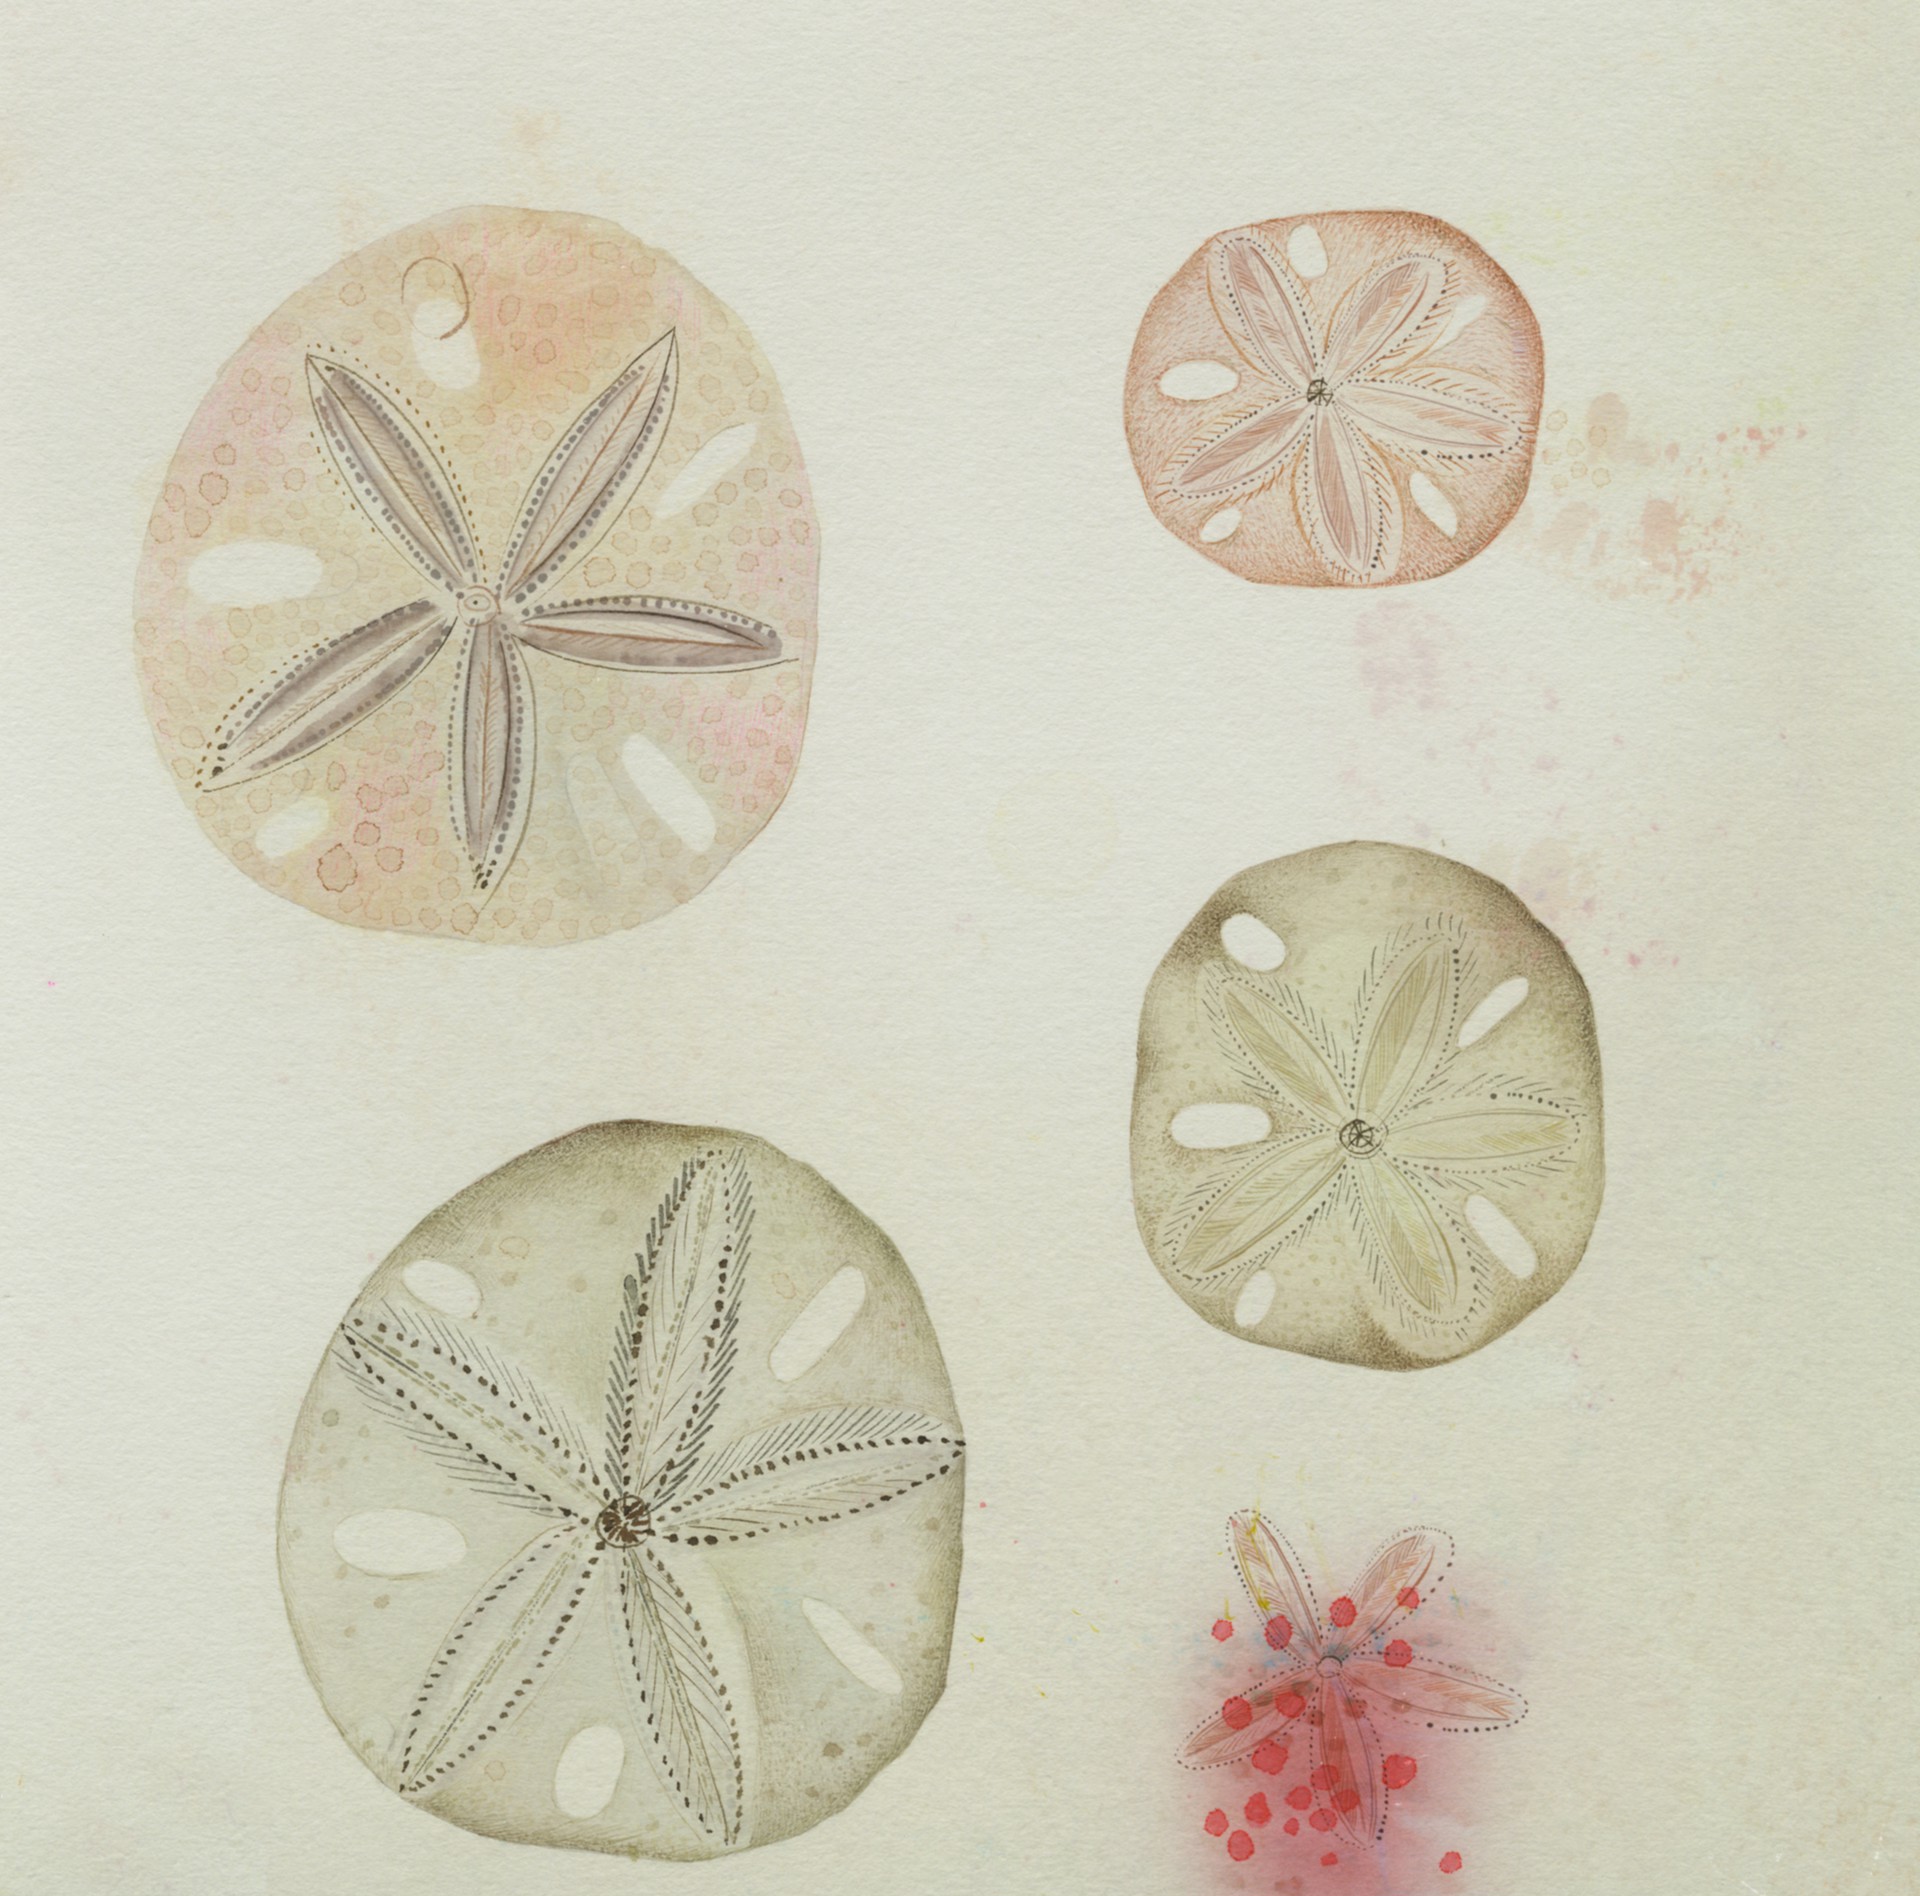 Sand Dollars by Anne Smith